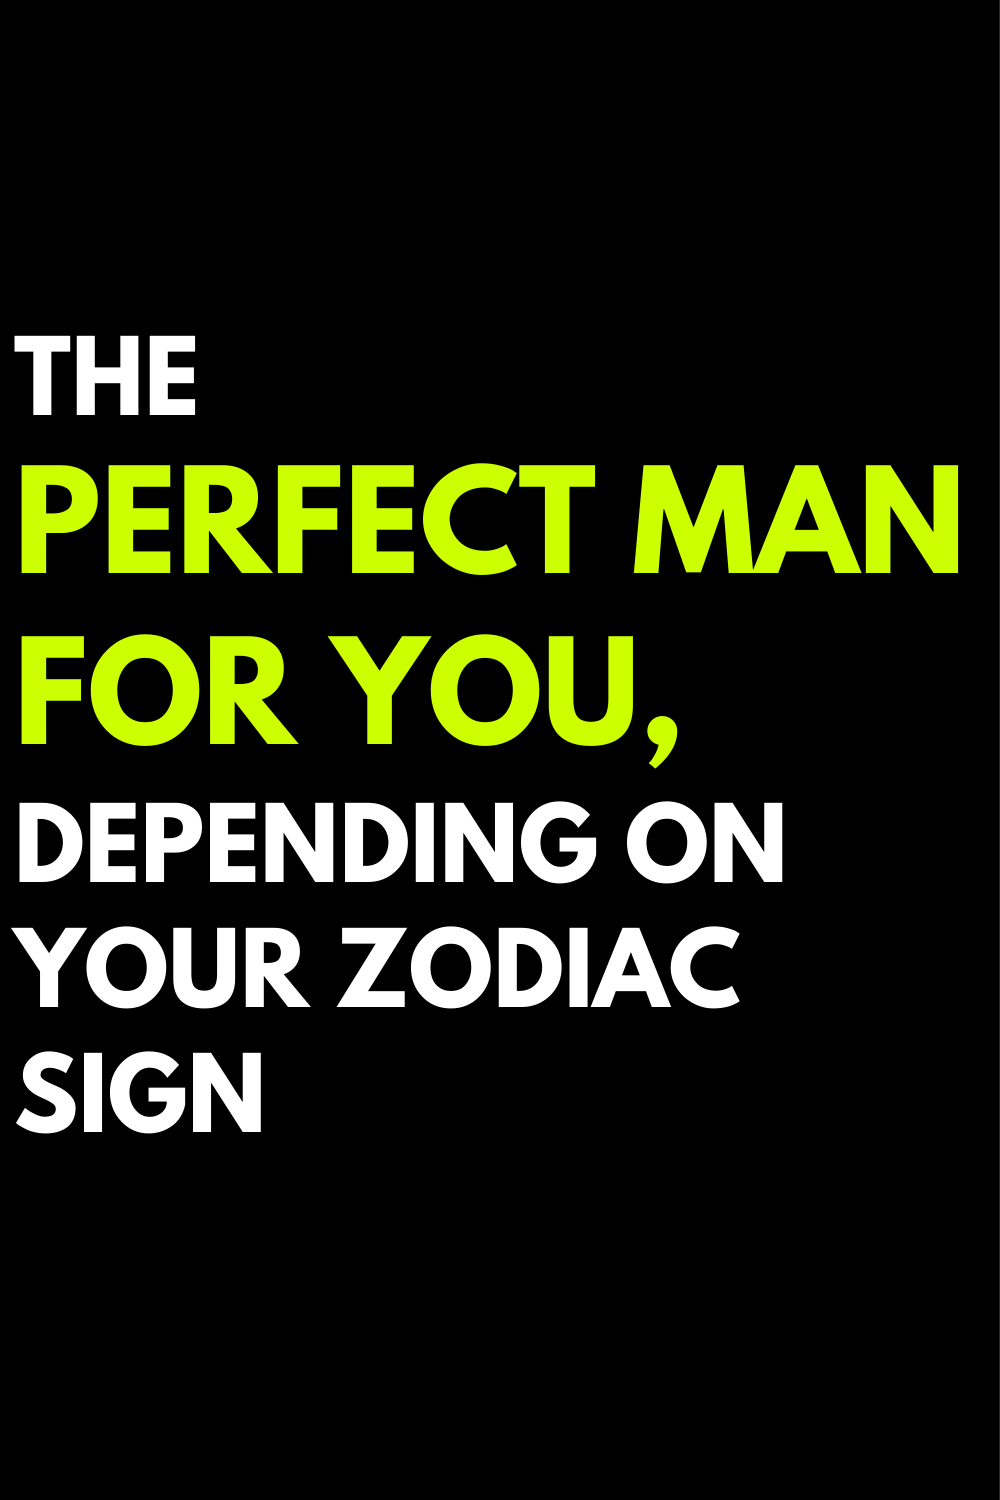 The perfect man for you, depending on your zodiac sign